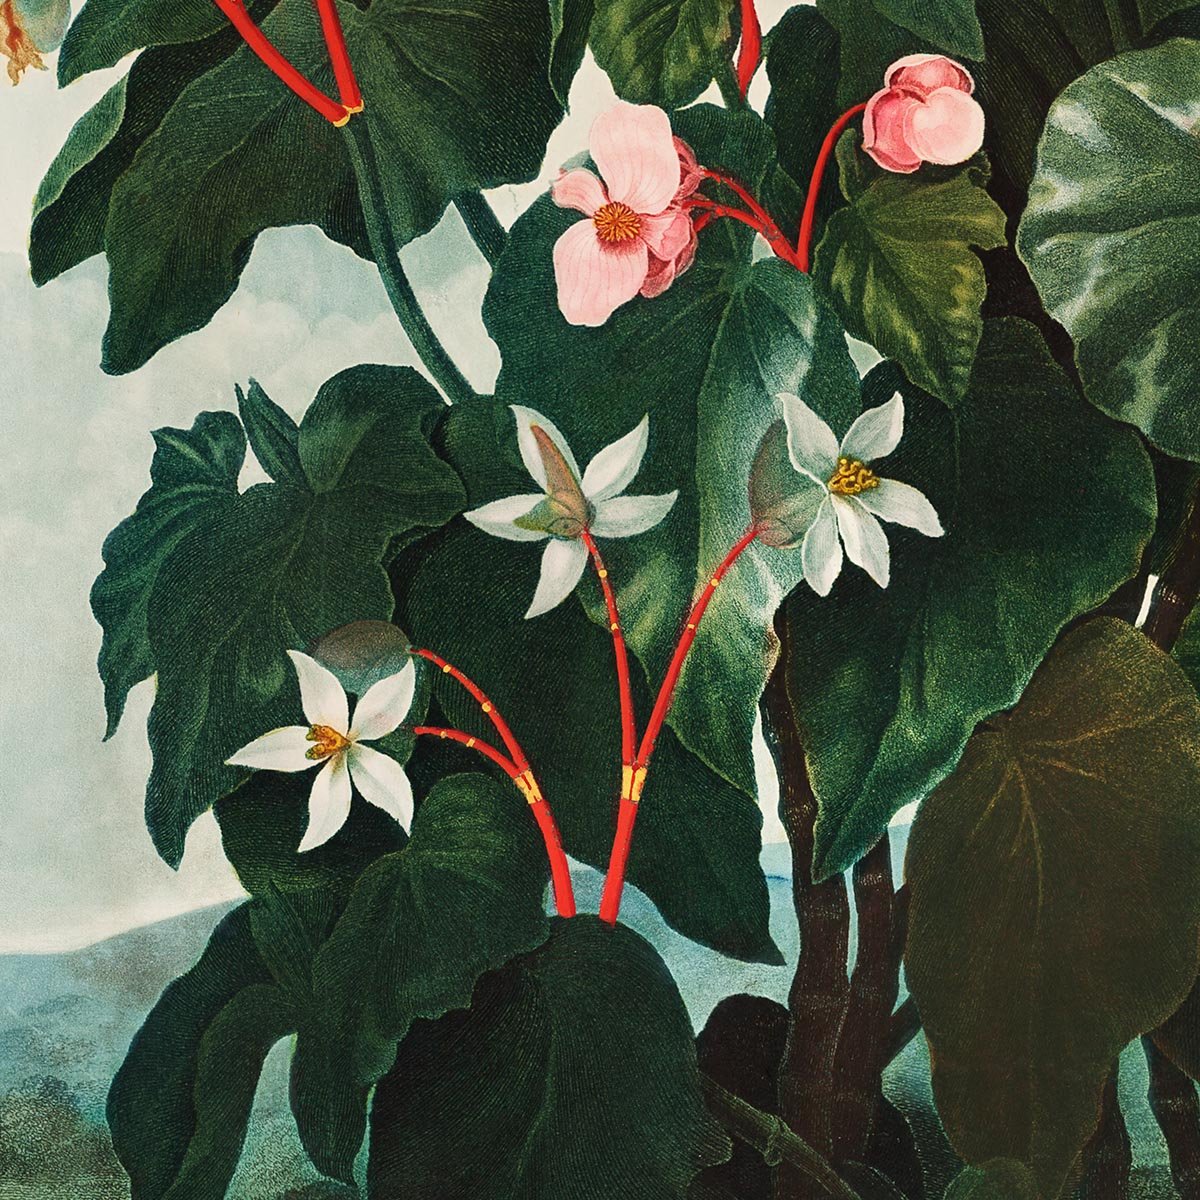 Begonia Plant from The Temple of Flora